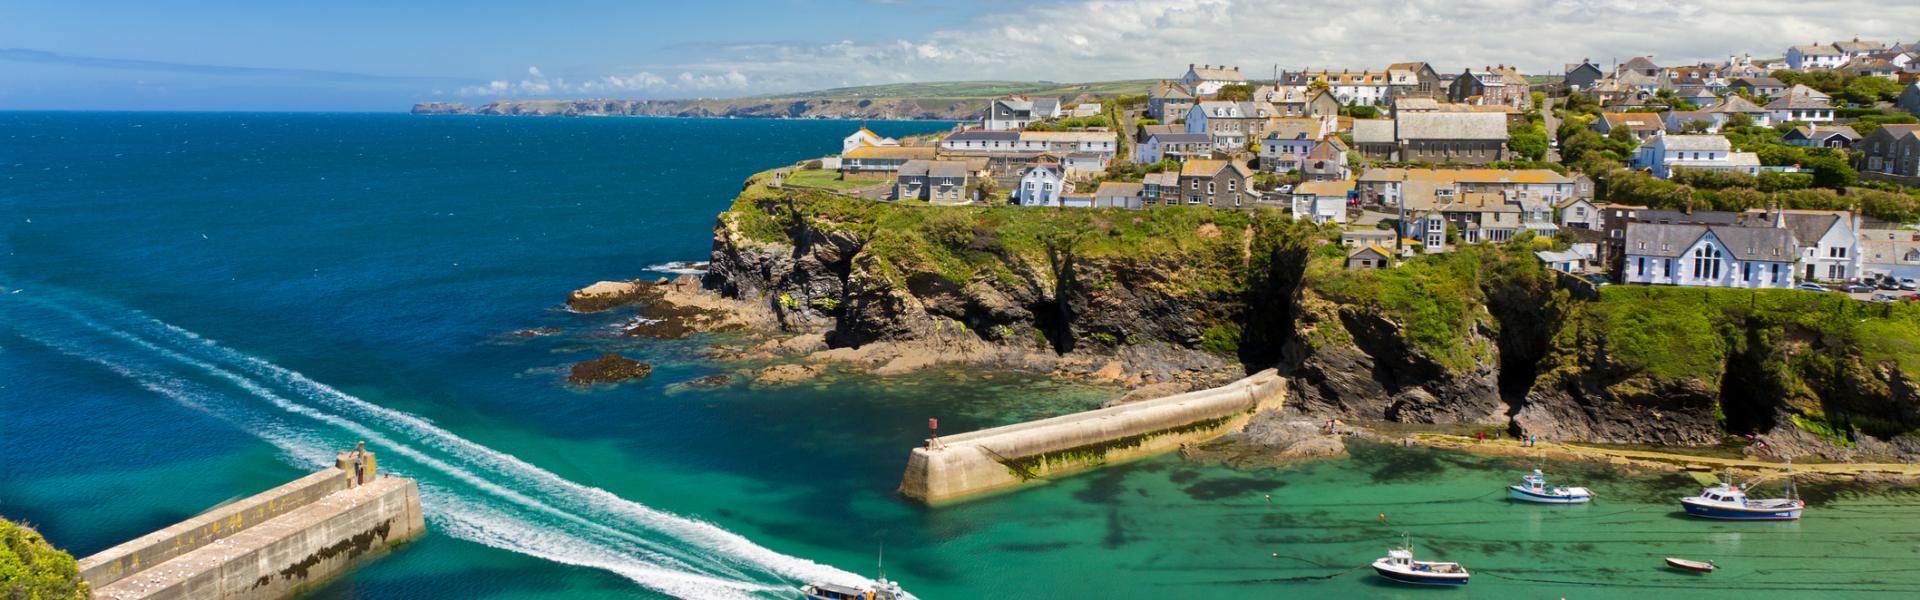 Holiday Cottages & Accommodation in Port Isaac - HomeToGo